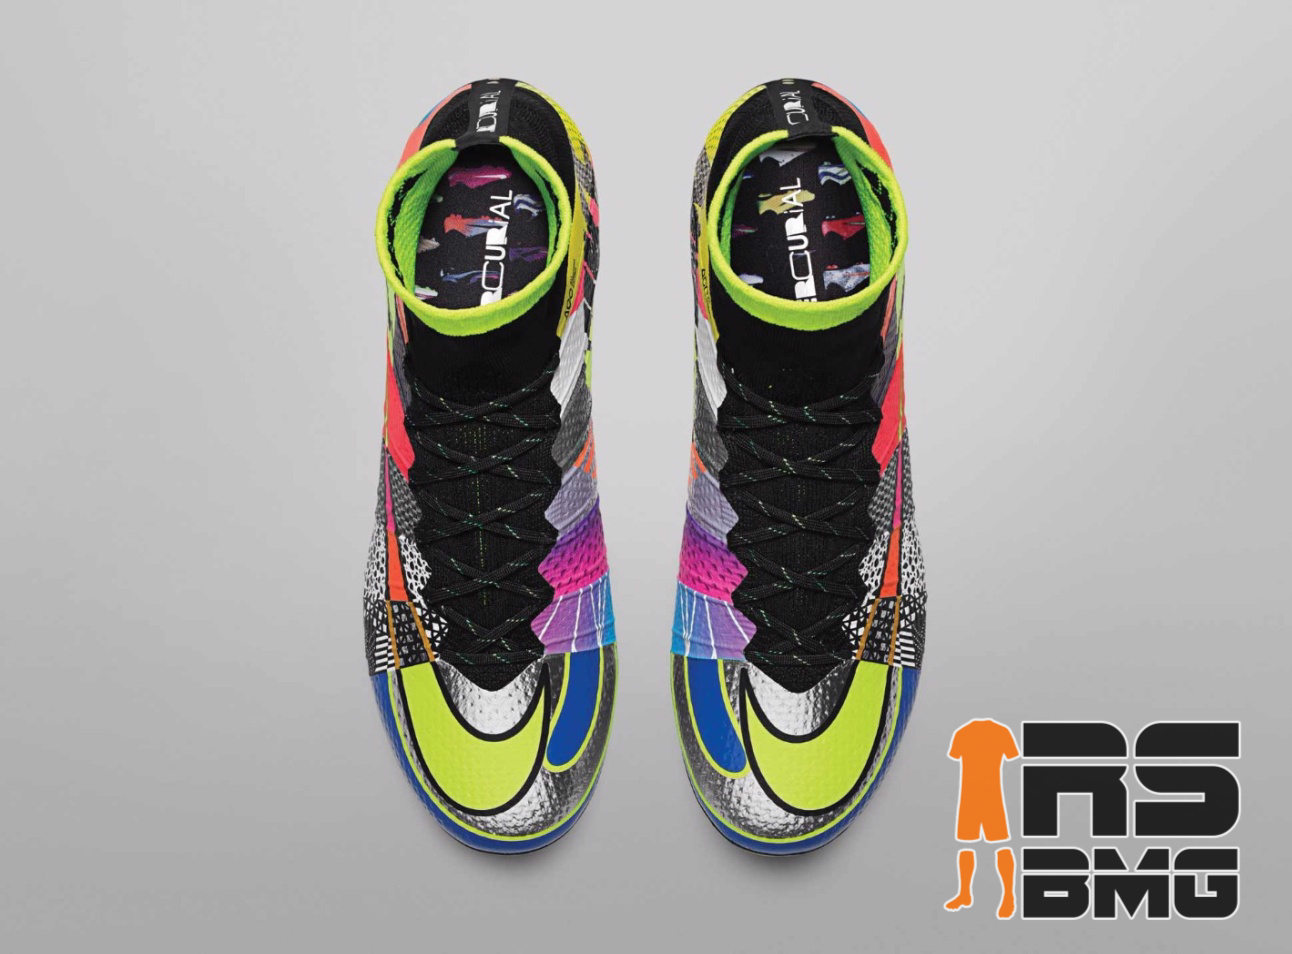 GIAY NIKE MERCURIAL SUPERFLY IV “WHAT THE” -4